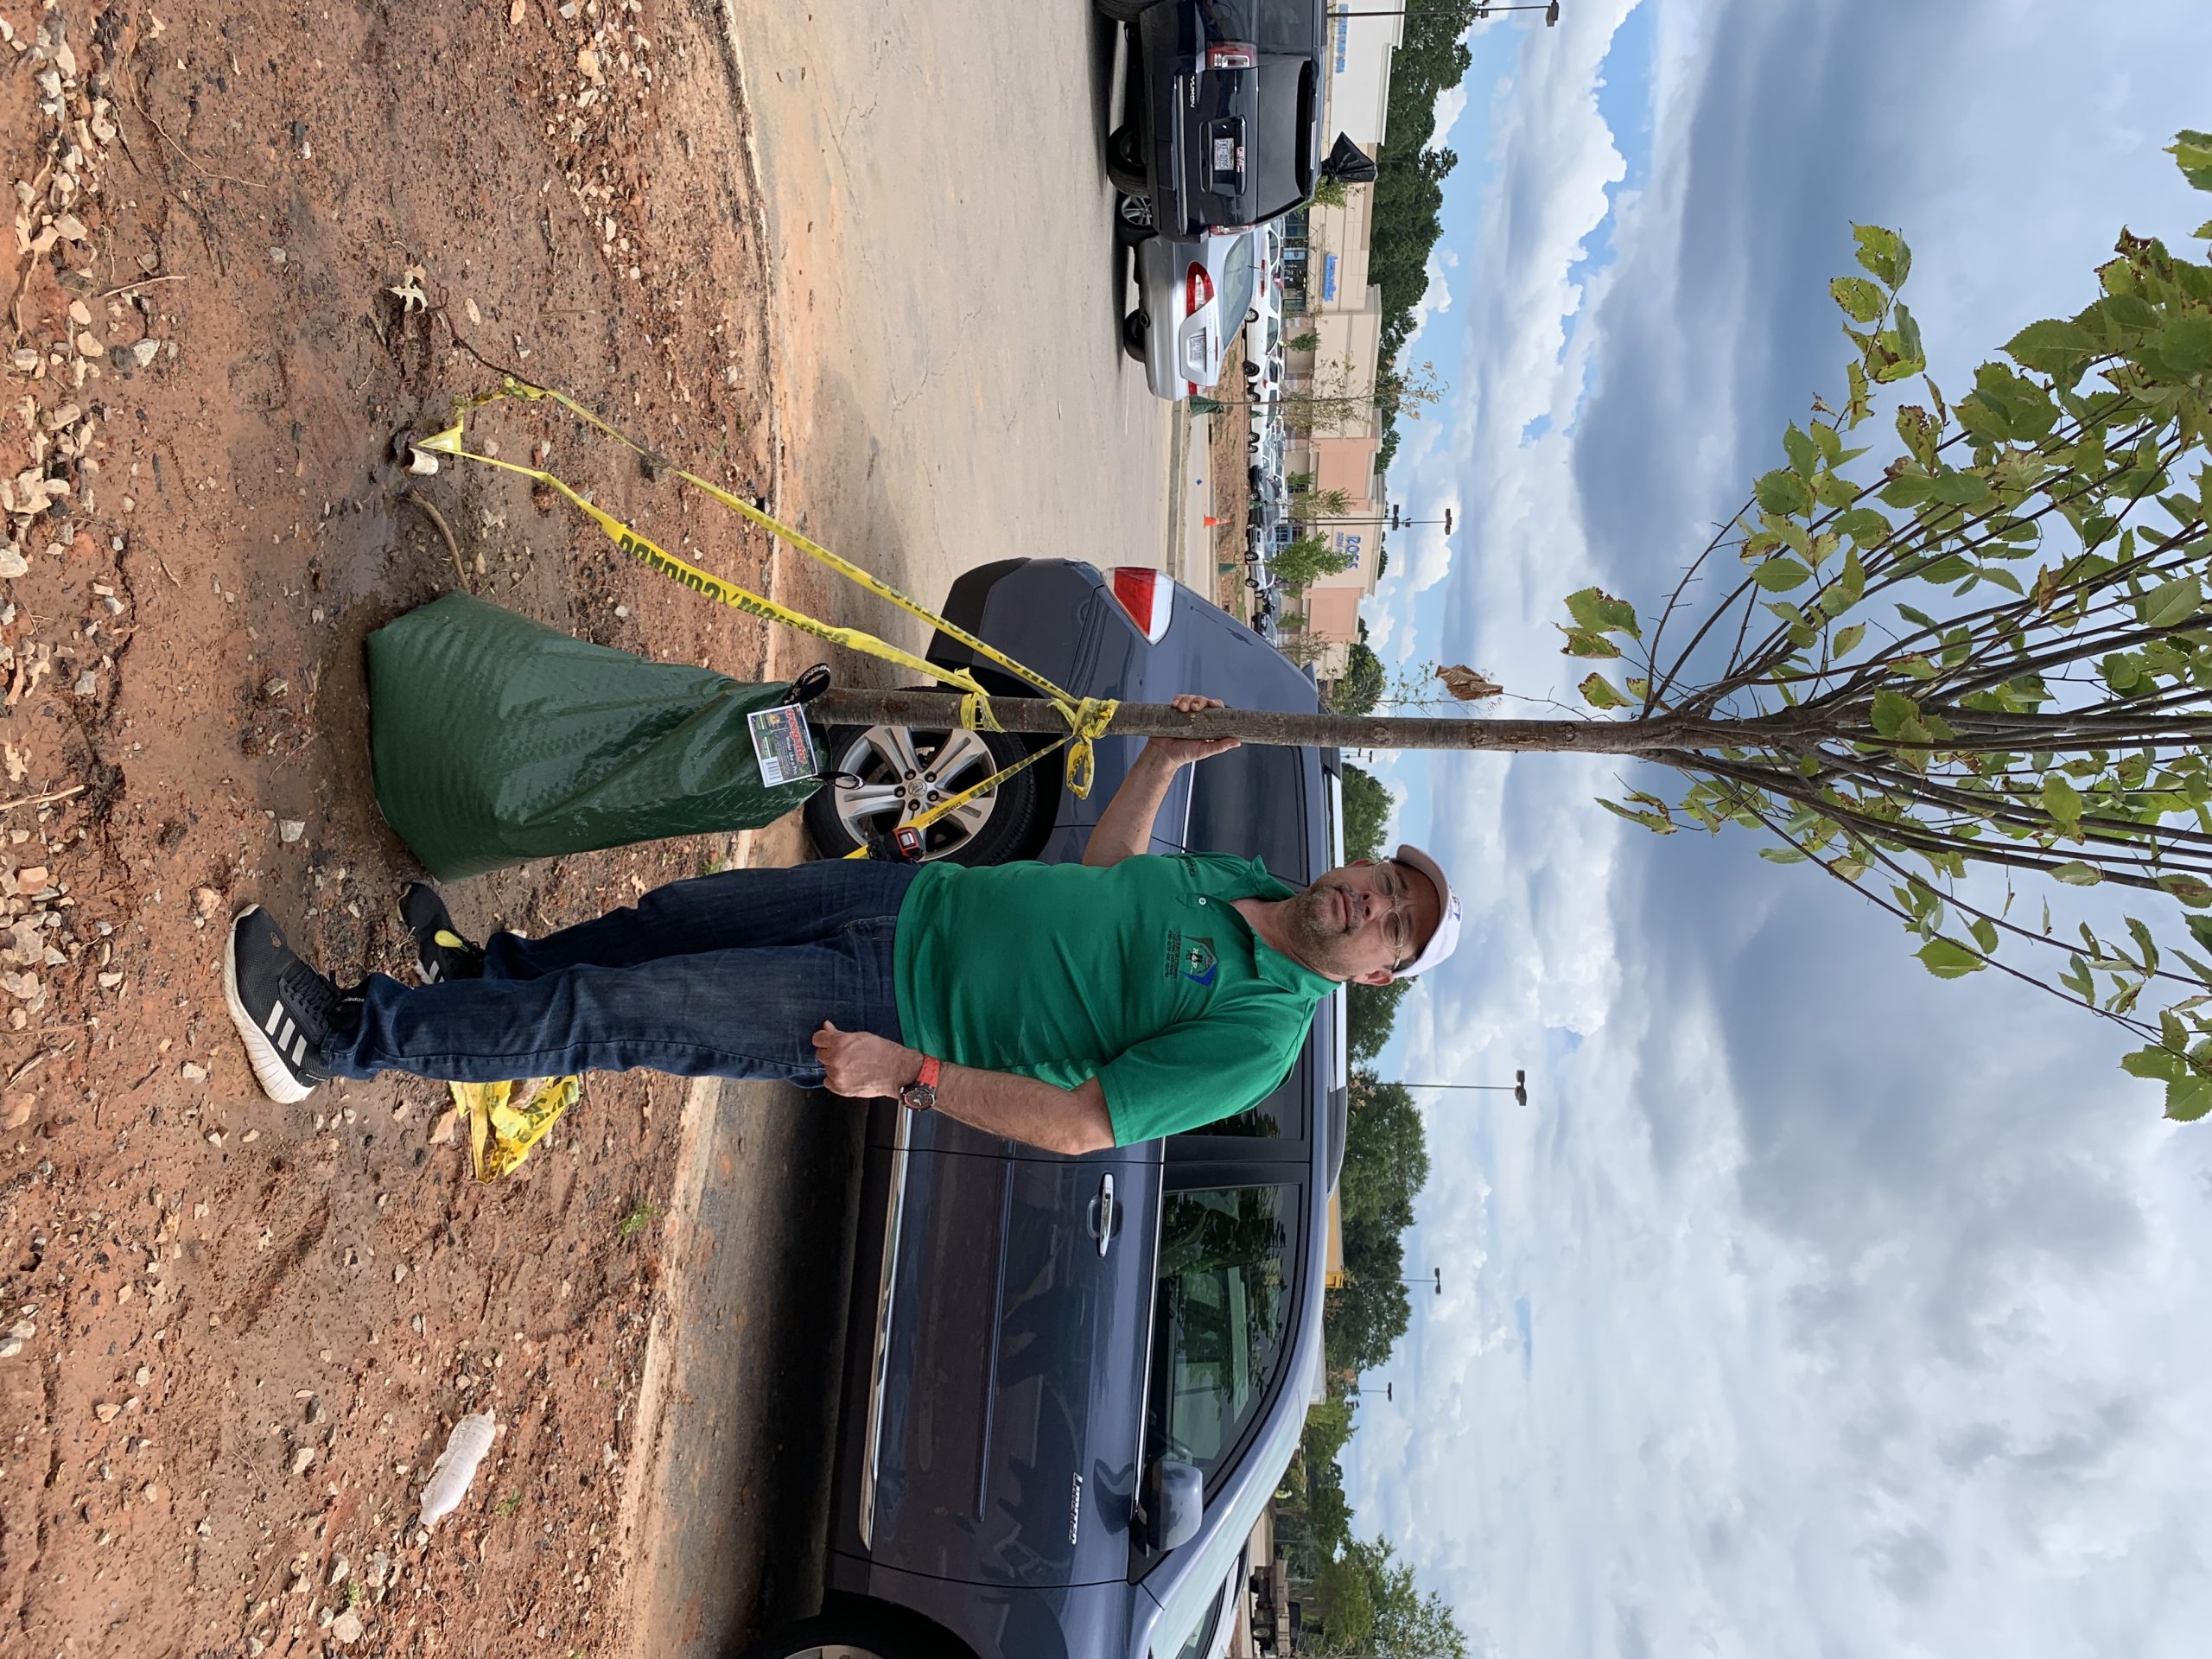 PROJECTSRFUSA. Image 1. Tree for Planting (PROJECTS RF USA - AGO2019)